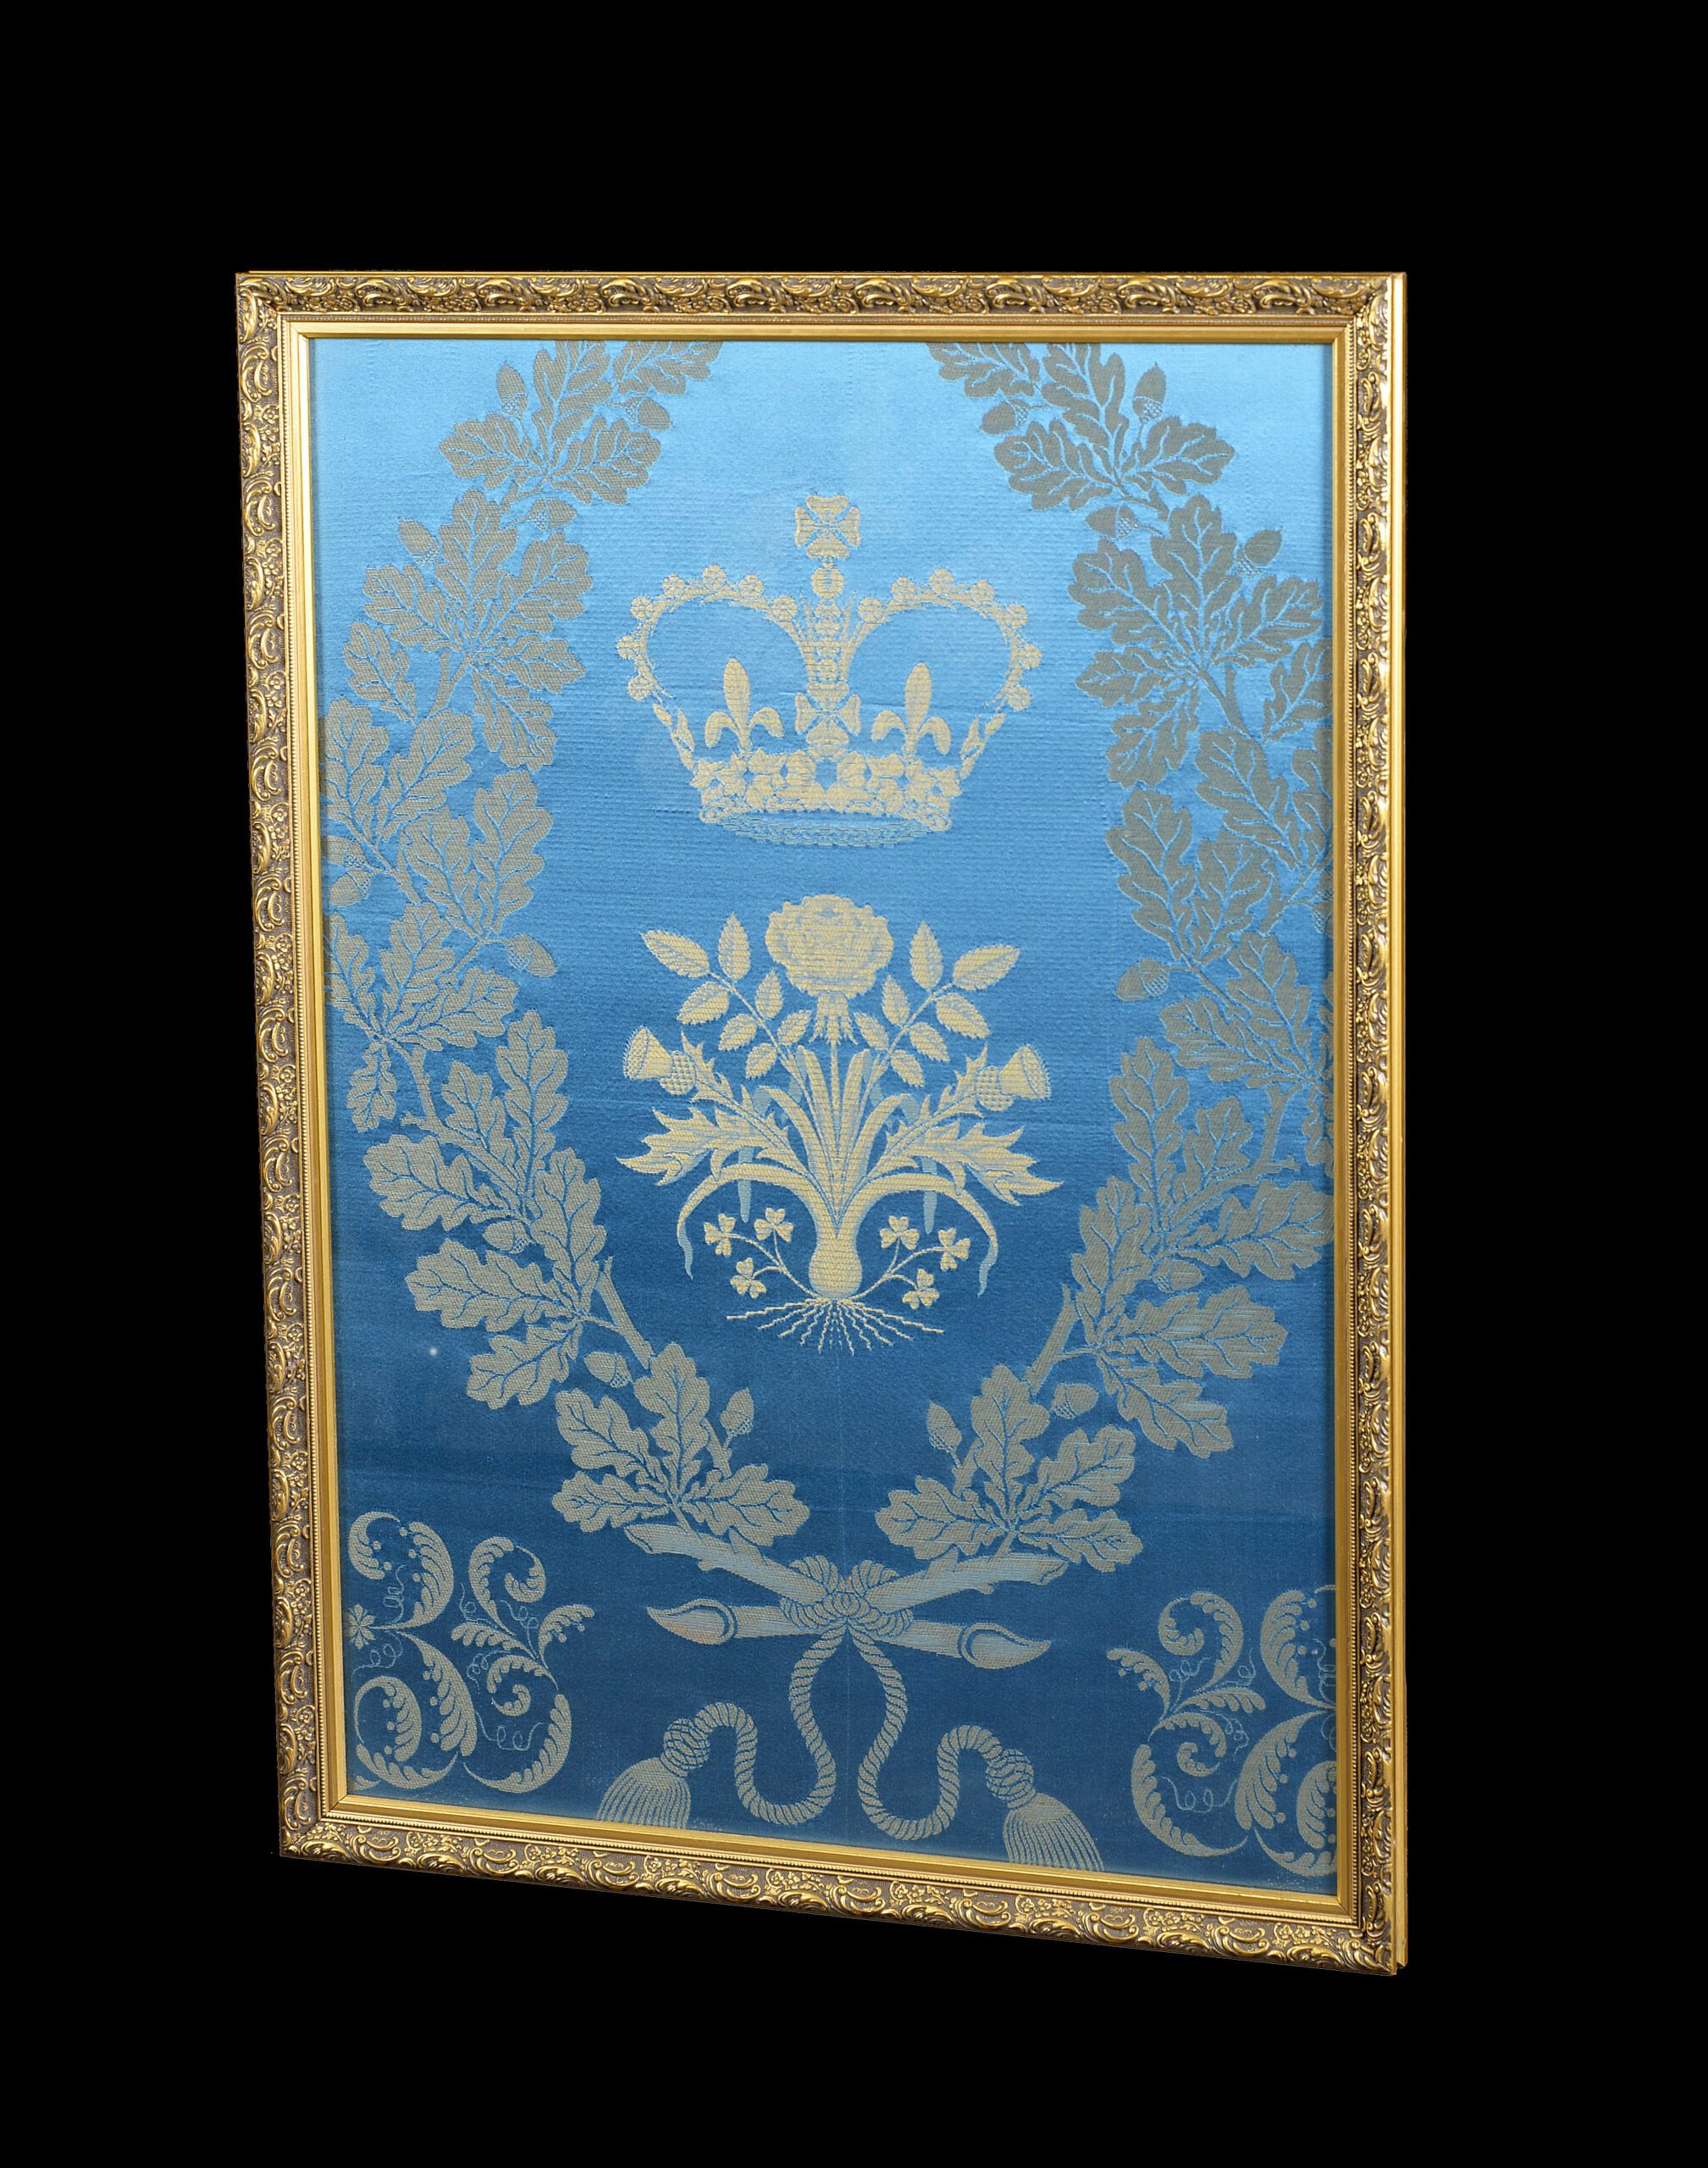 A silk panel commissioned to hang in Westminster Abbey for Queen Elizabeth II’s Coronation in 1953 has sold for four times its estimate. (Matthew Newby/Zenger)